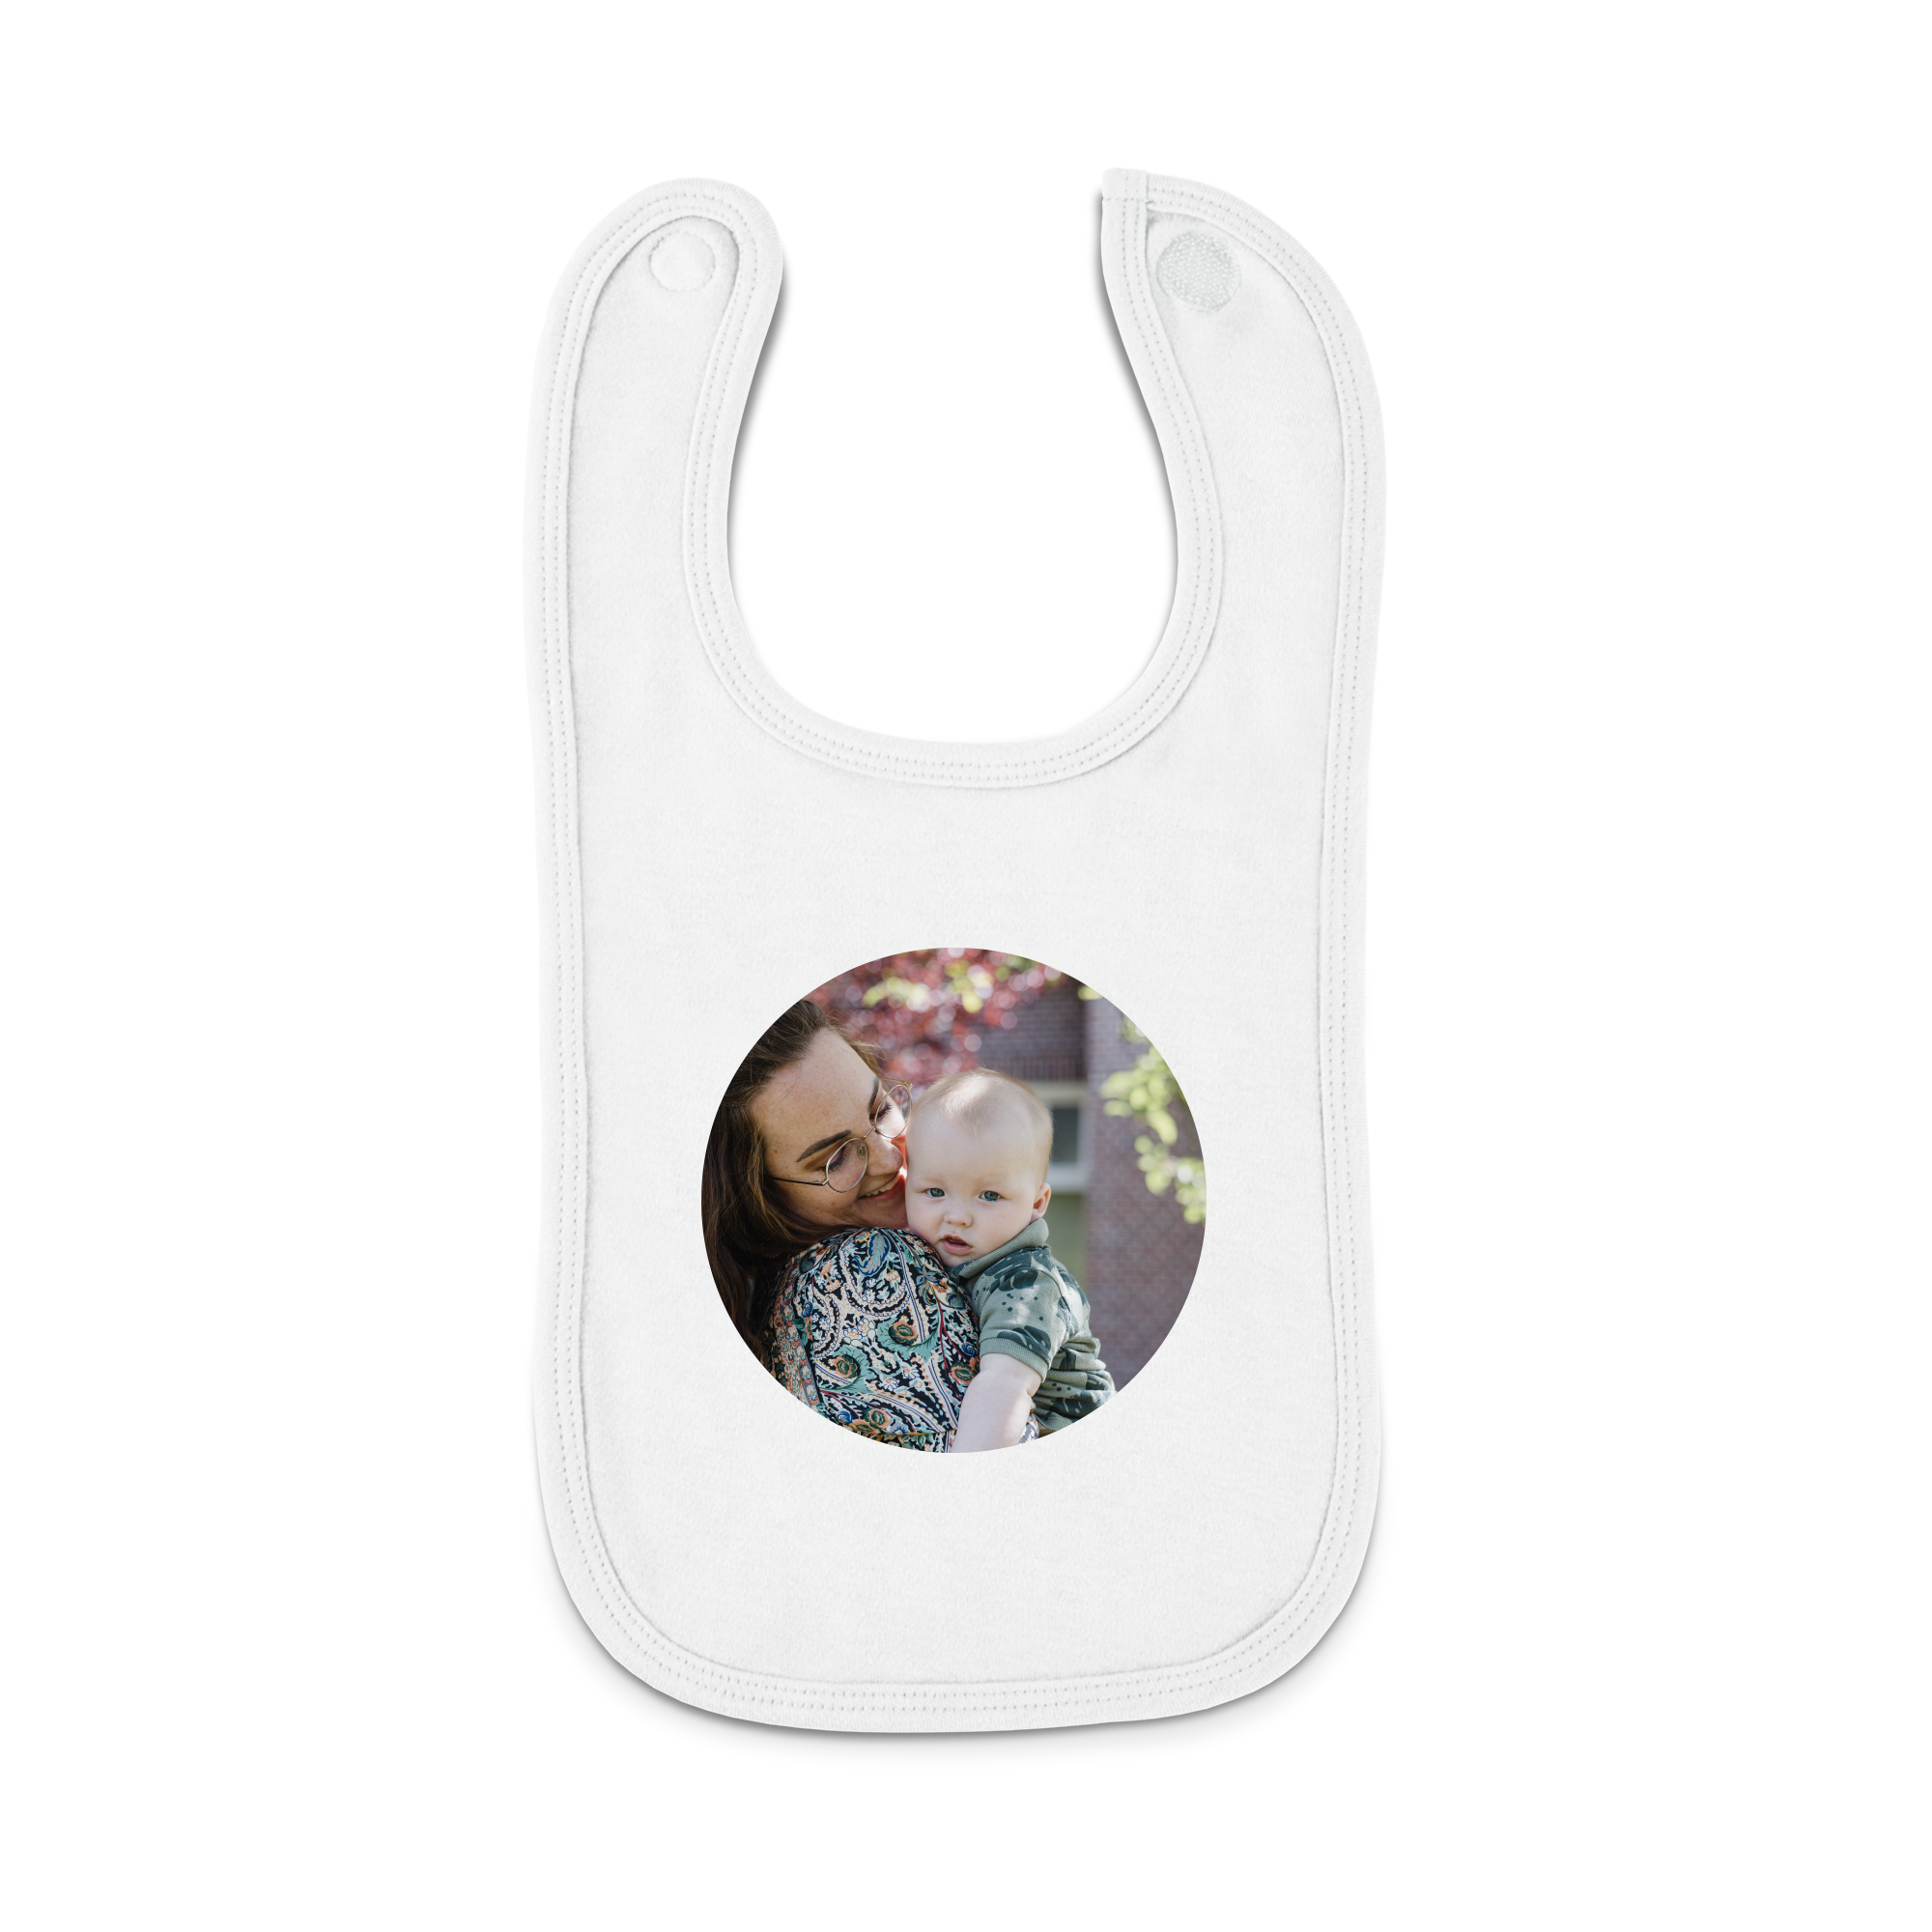 Personalized Baby Bib EMBROIDERED with Your Custom Text and Color 100% Cotton Unisex 